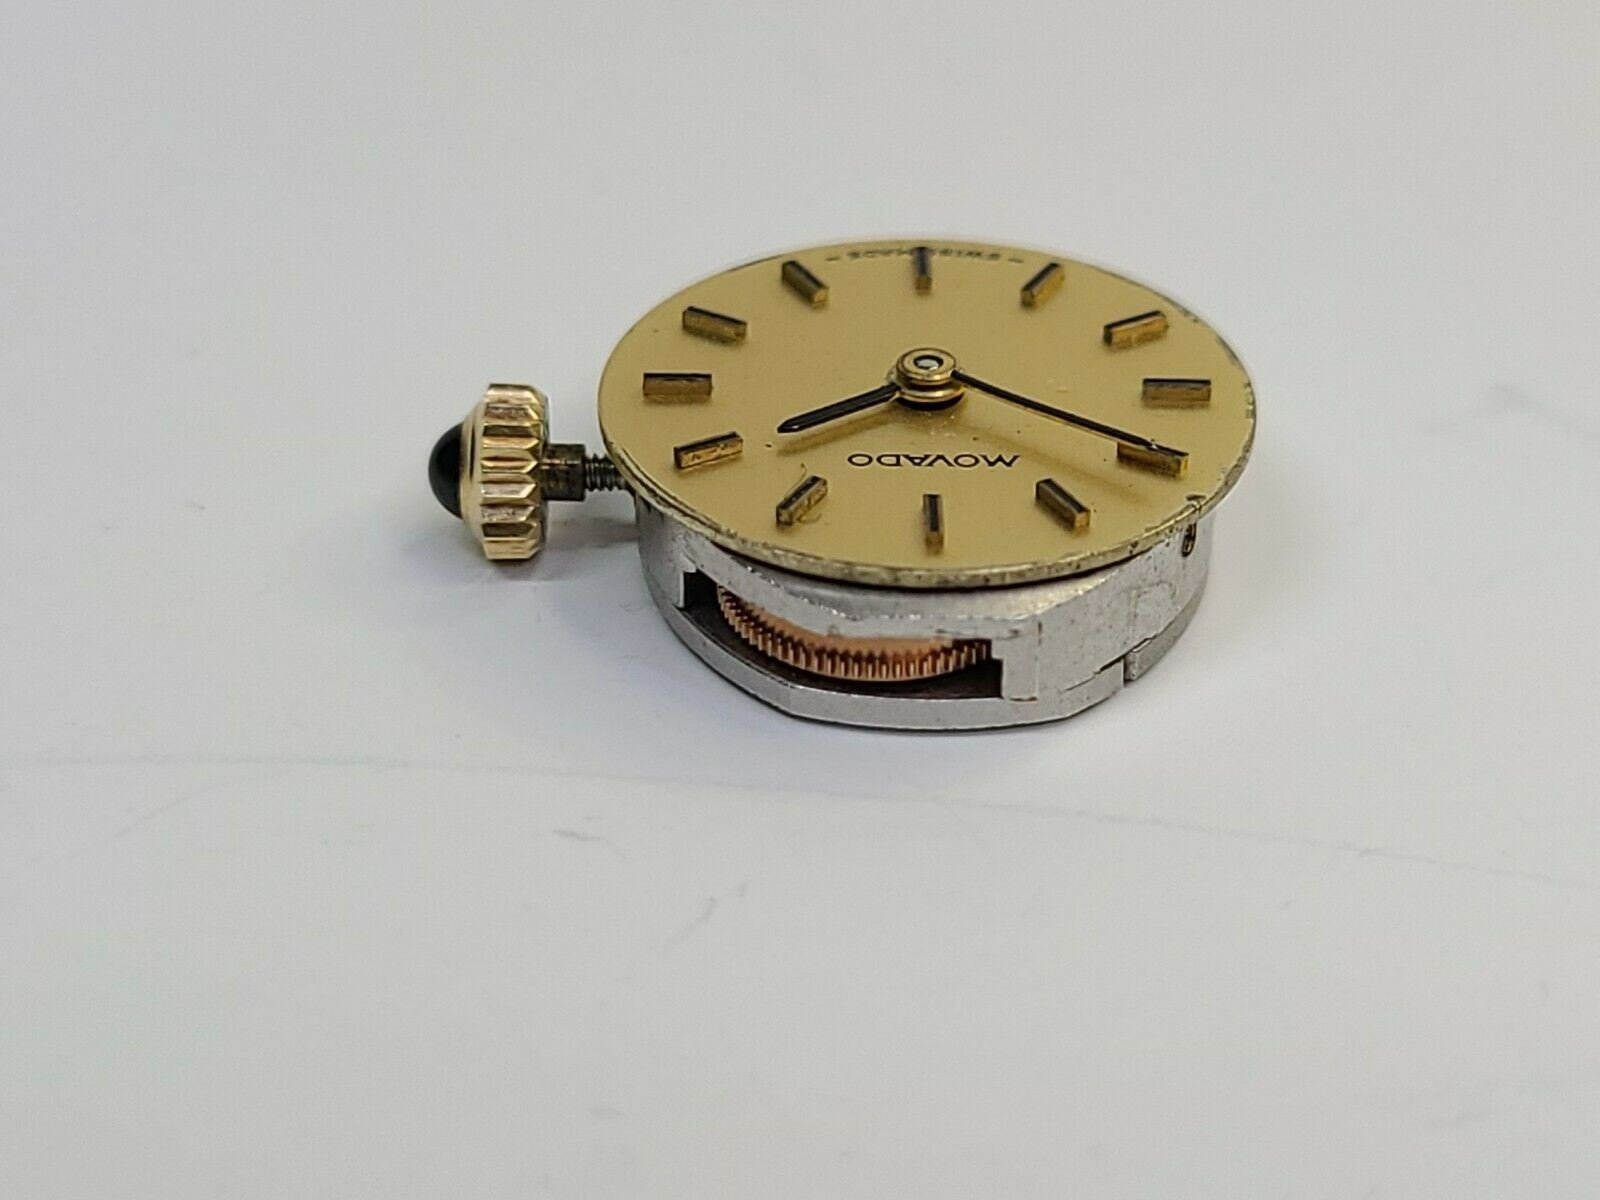 Movado With Zenith 16.5 or 165 Movement with dial - Hands - Beautiful Crown